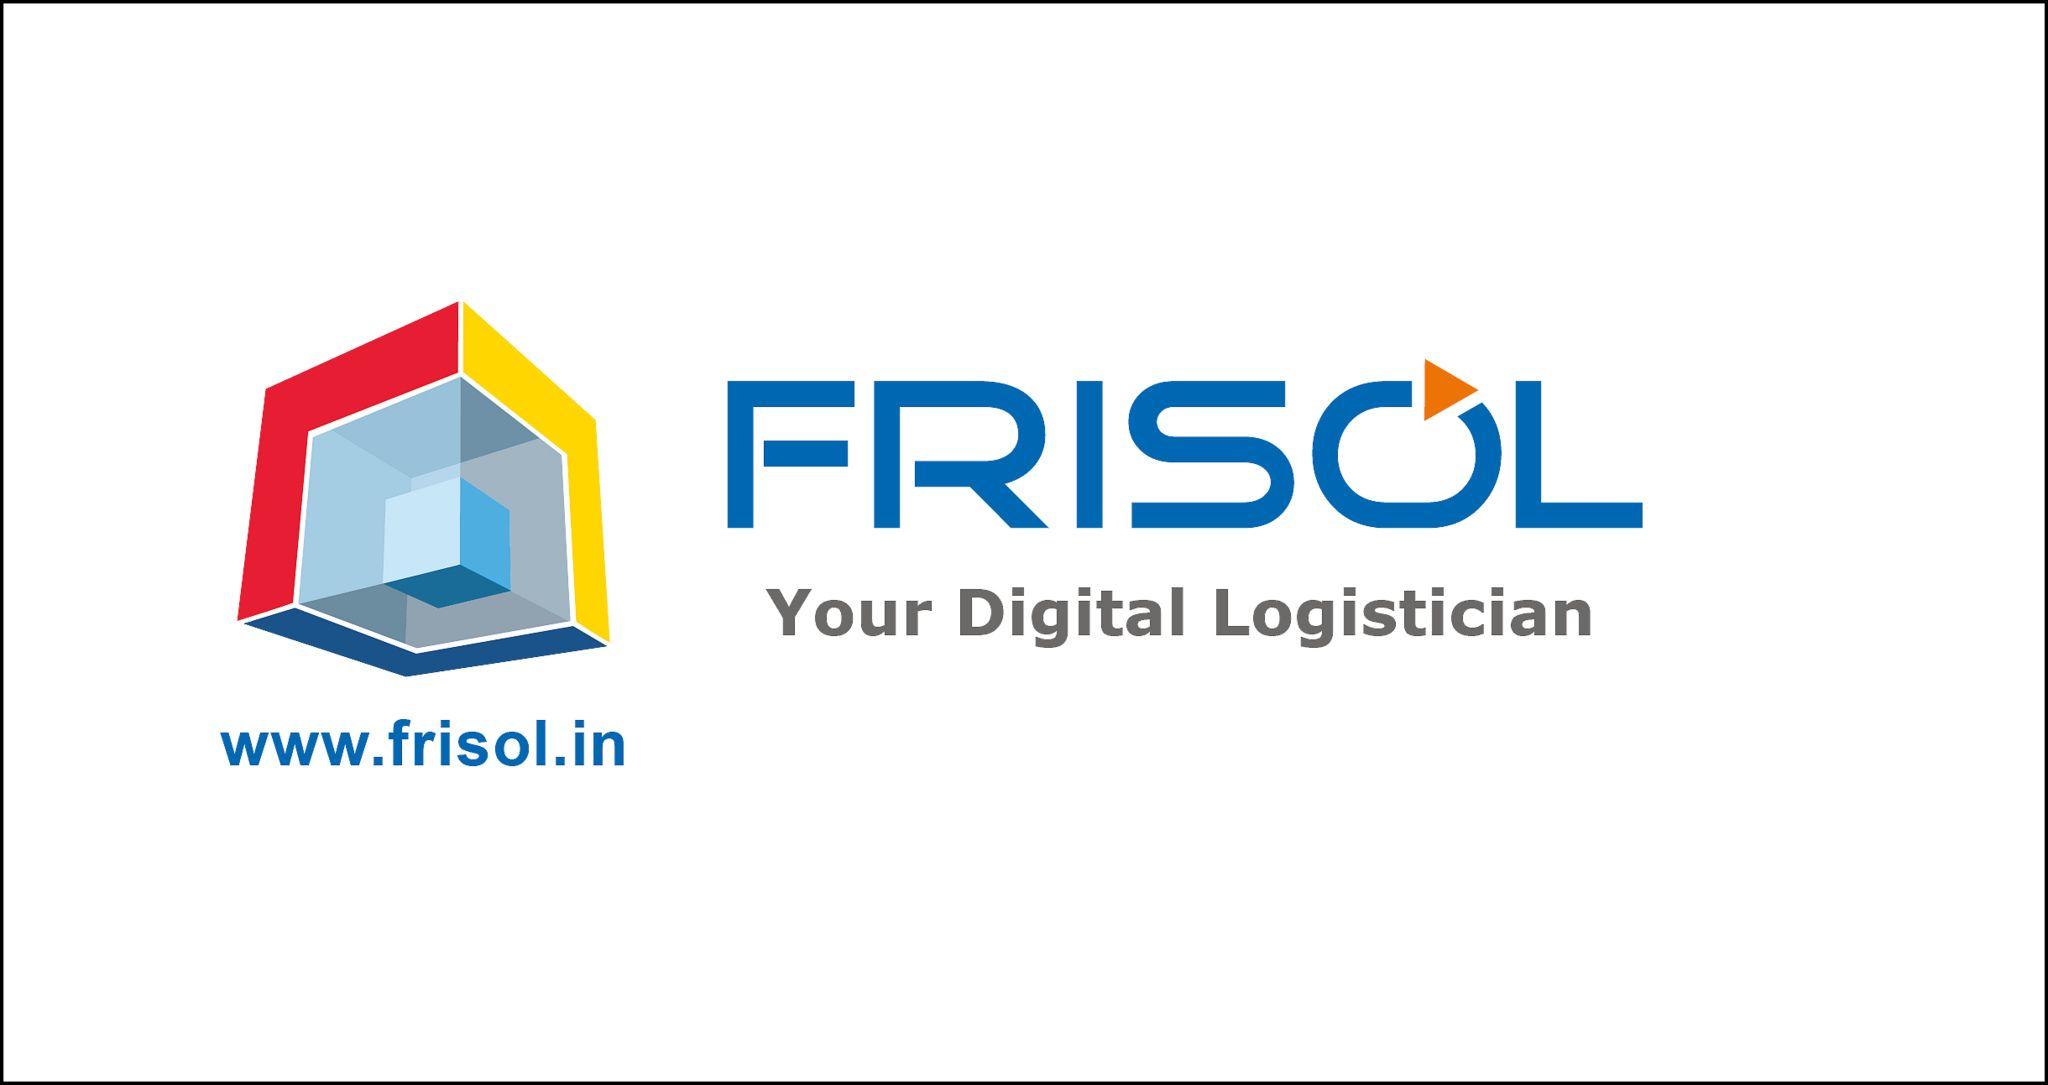 1st Look Logo - FRISOL logo 1st look | The first look of FRISOL logo with th… | Flickr